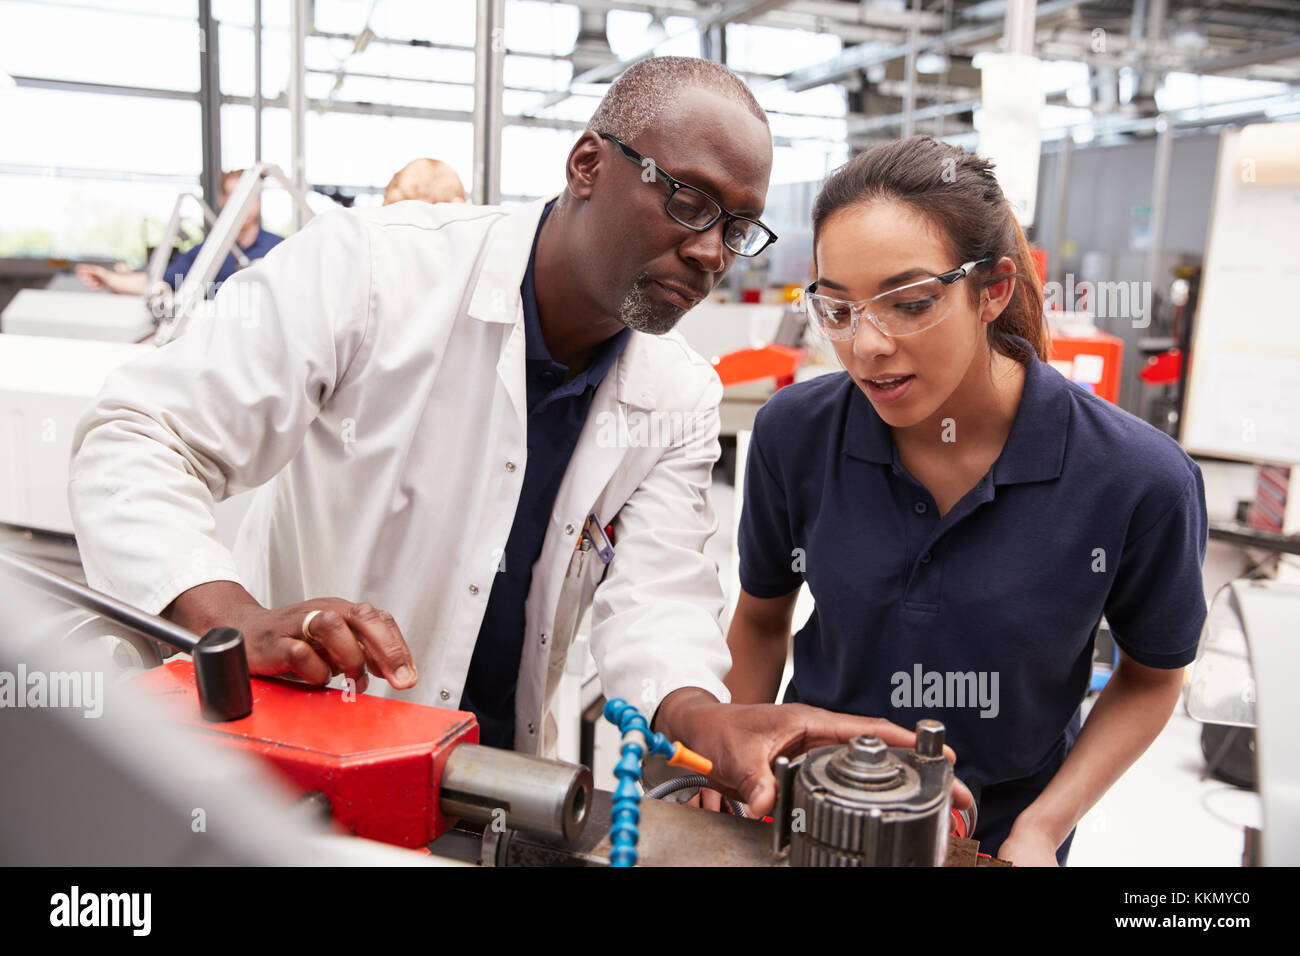 Engineer showing equipment to a female apprentice, close up Stock Photo